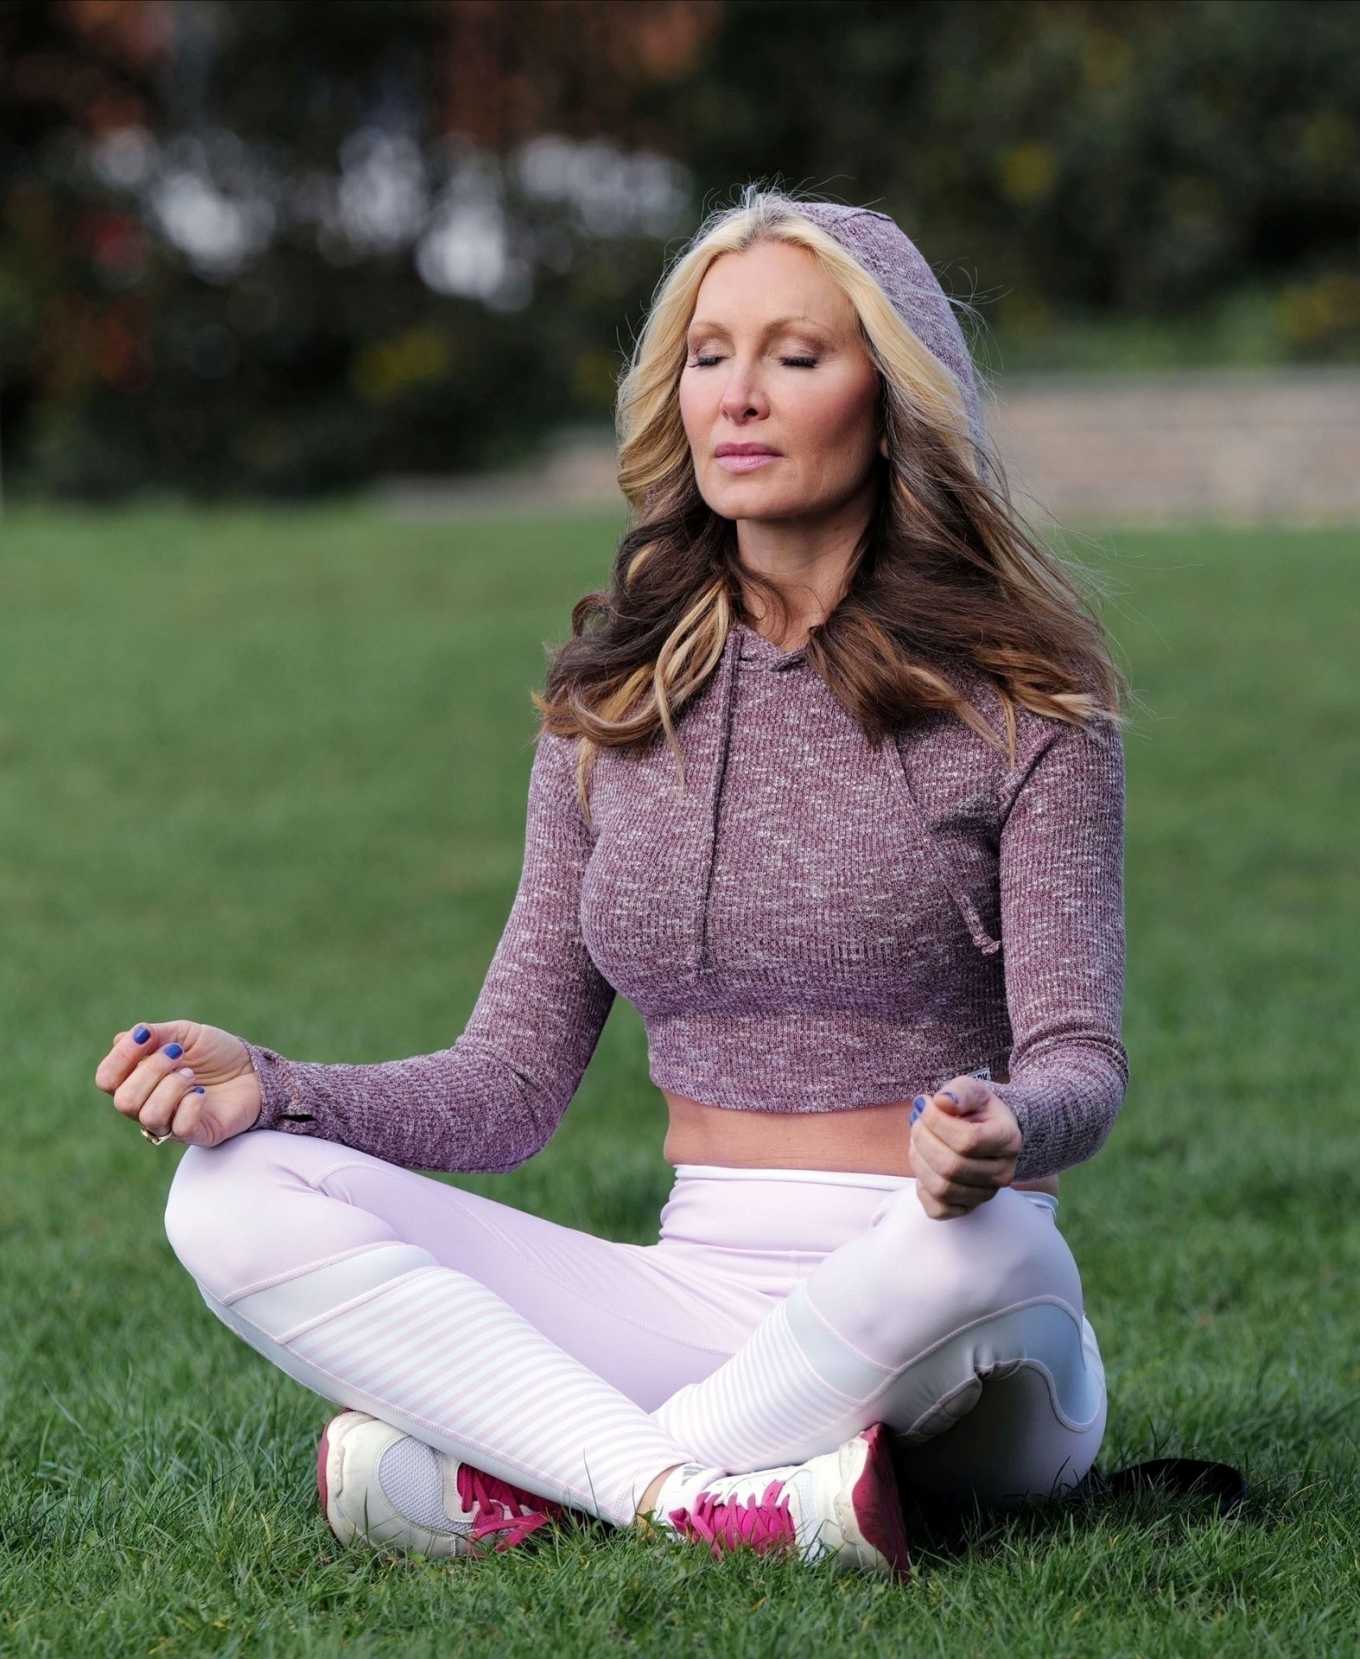 Caprice Bourret â€“ Practicing Yoga in a park in London